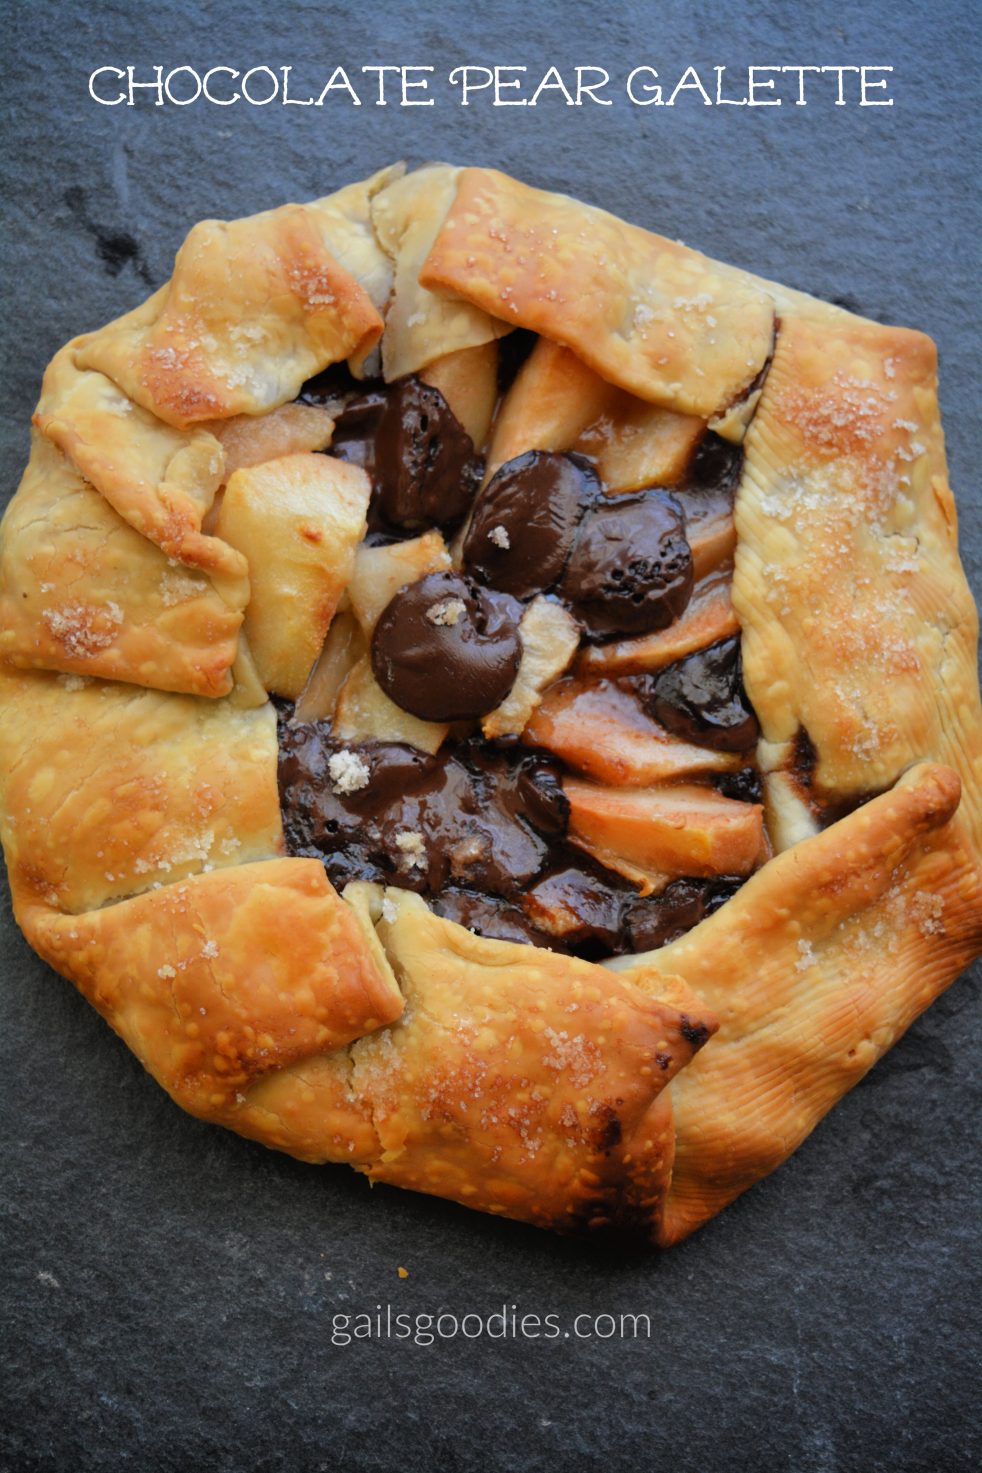 Chocolate pear galetted viewed from the top. The golden pastry is folded up around the sides making a border around the filling. The center is open revealing slices of pear and disks of dark chocolate. The words "Chocolate Pear Galette" are at the top of the photo.